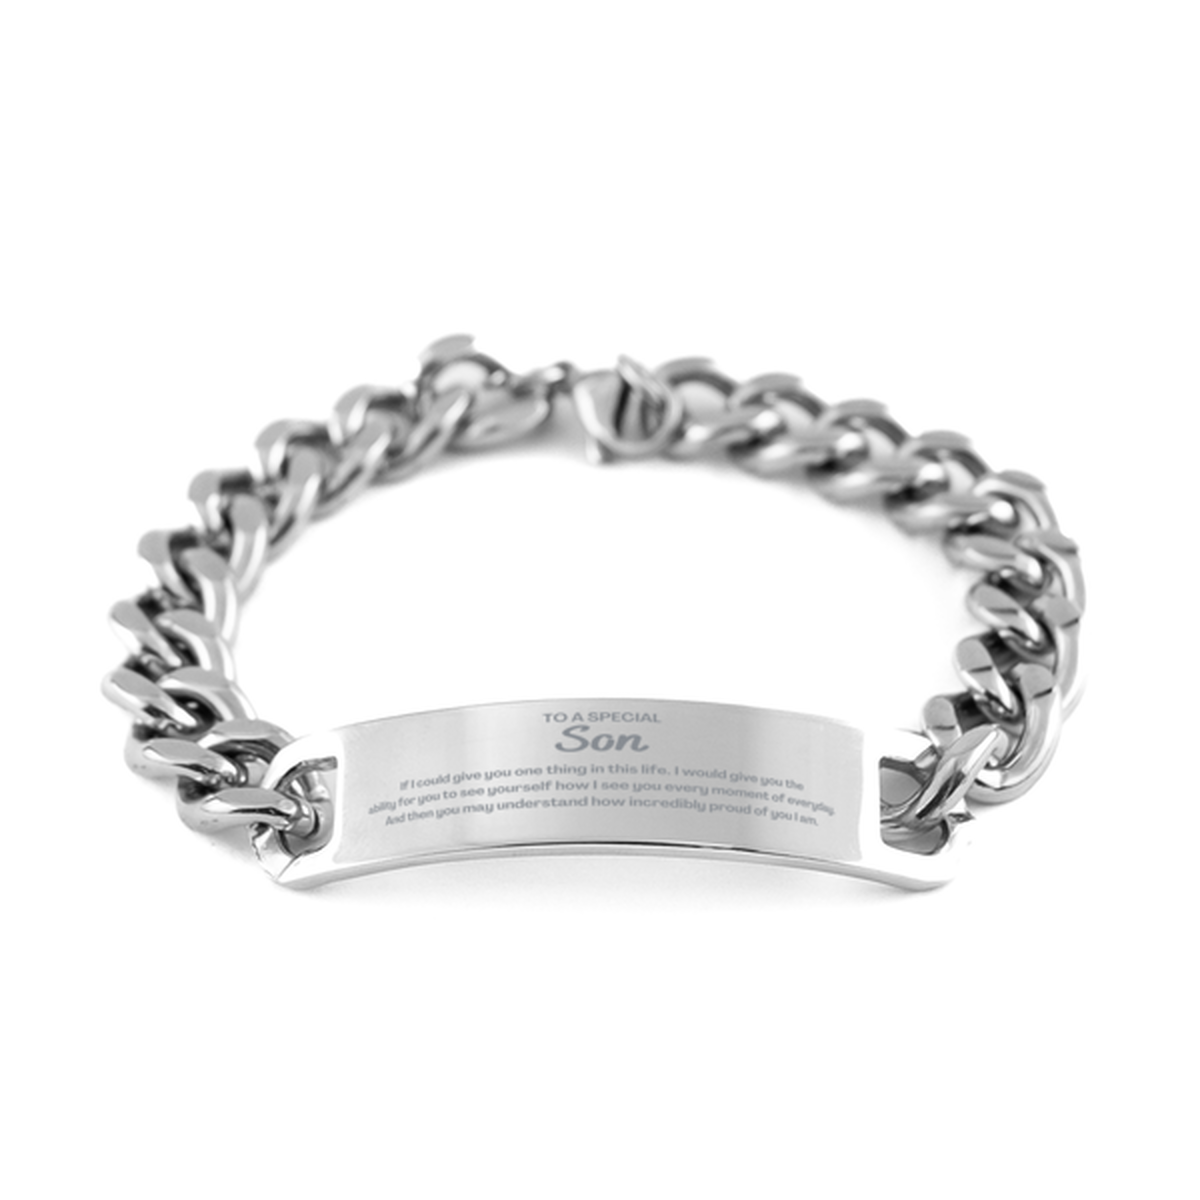 To My Son Cuban Chain Stainless Steel Bracelet, Gifts For Son Engraved, Inspirational Gifts for Christmas Birthday, Epic Gifts for Son To A Special Son how incredibly proud of you I am